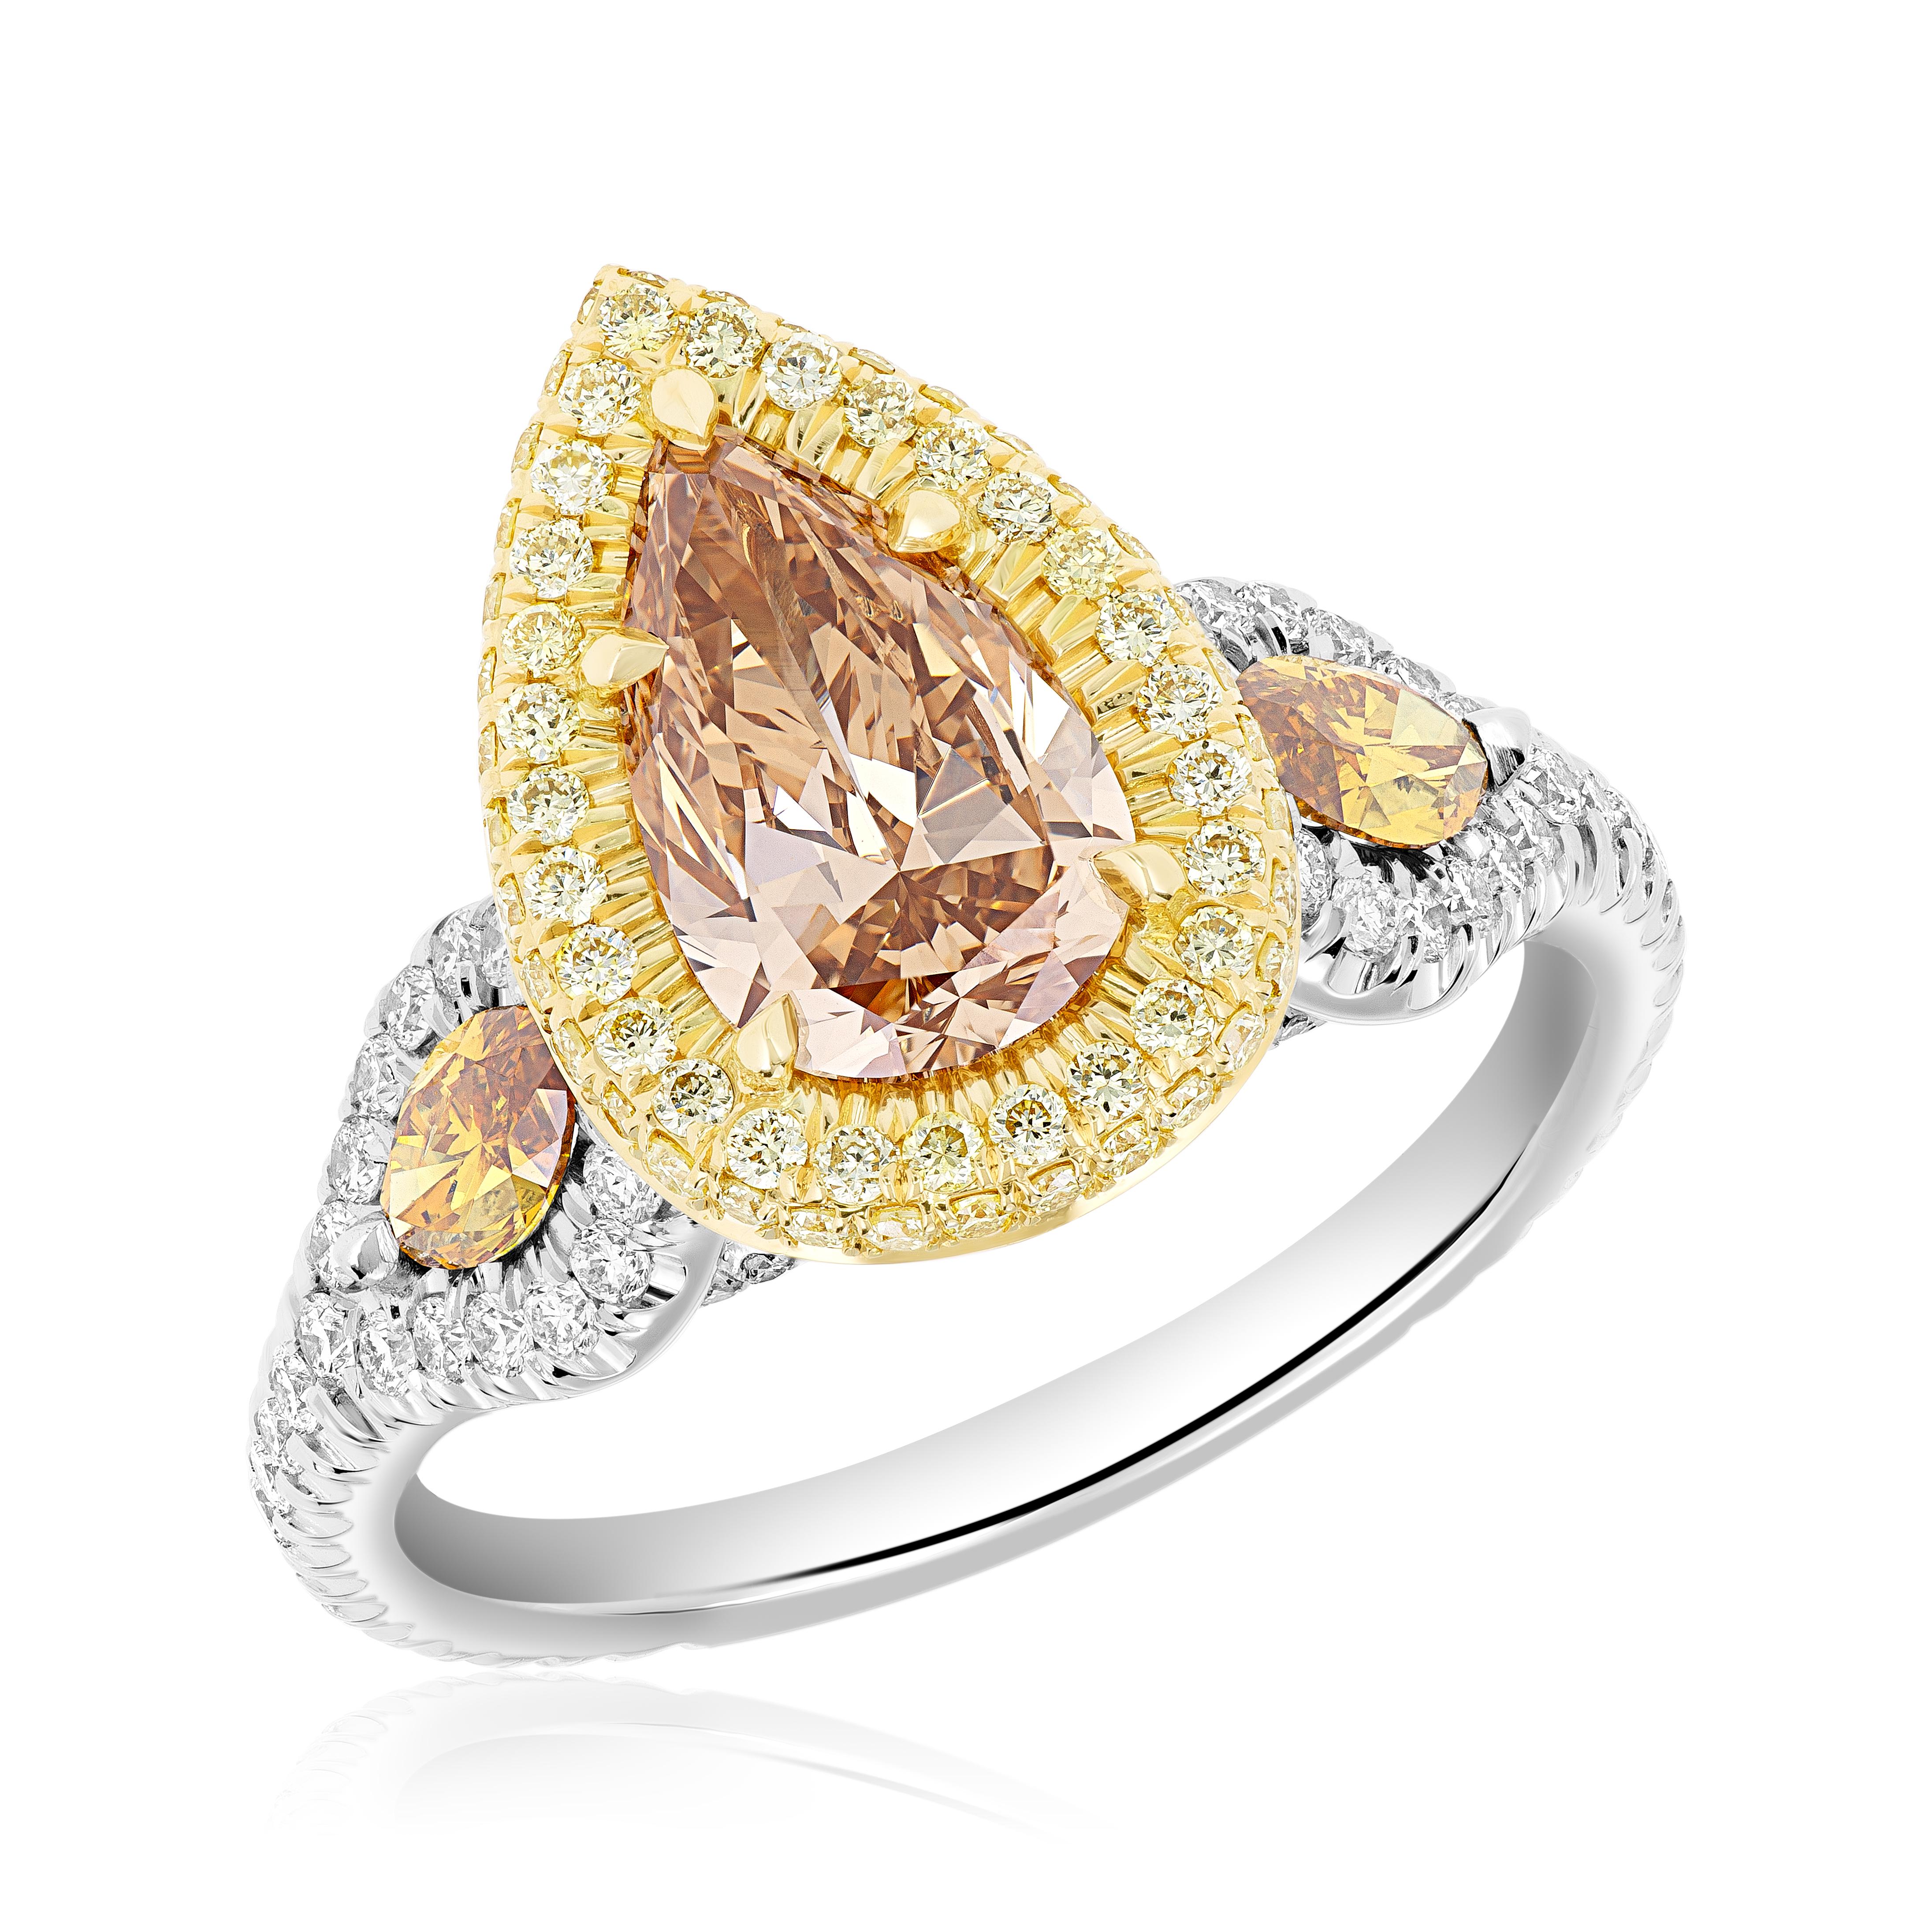 Make a striking statement with our exquisite handmade pear-shaped fancy deep brown-yellow ring! This extraordinary one-of-a-kind piece showcases a stunning 1.50-carat pear-shaped diamond with a VS2 clarity, certified by the prestigious GIA, bearing